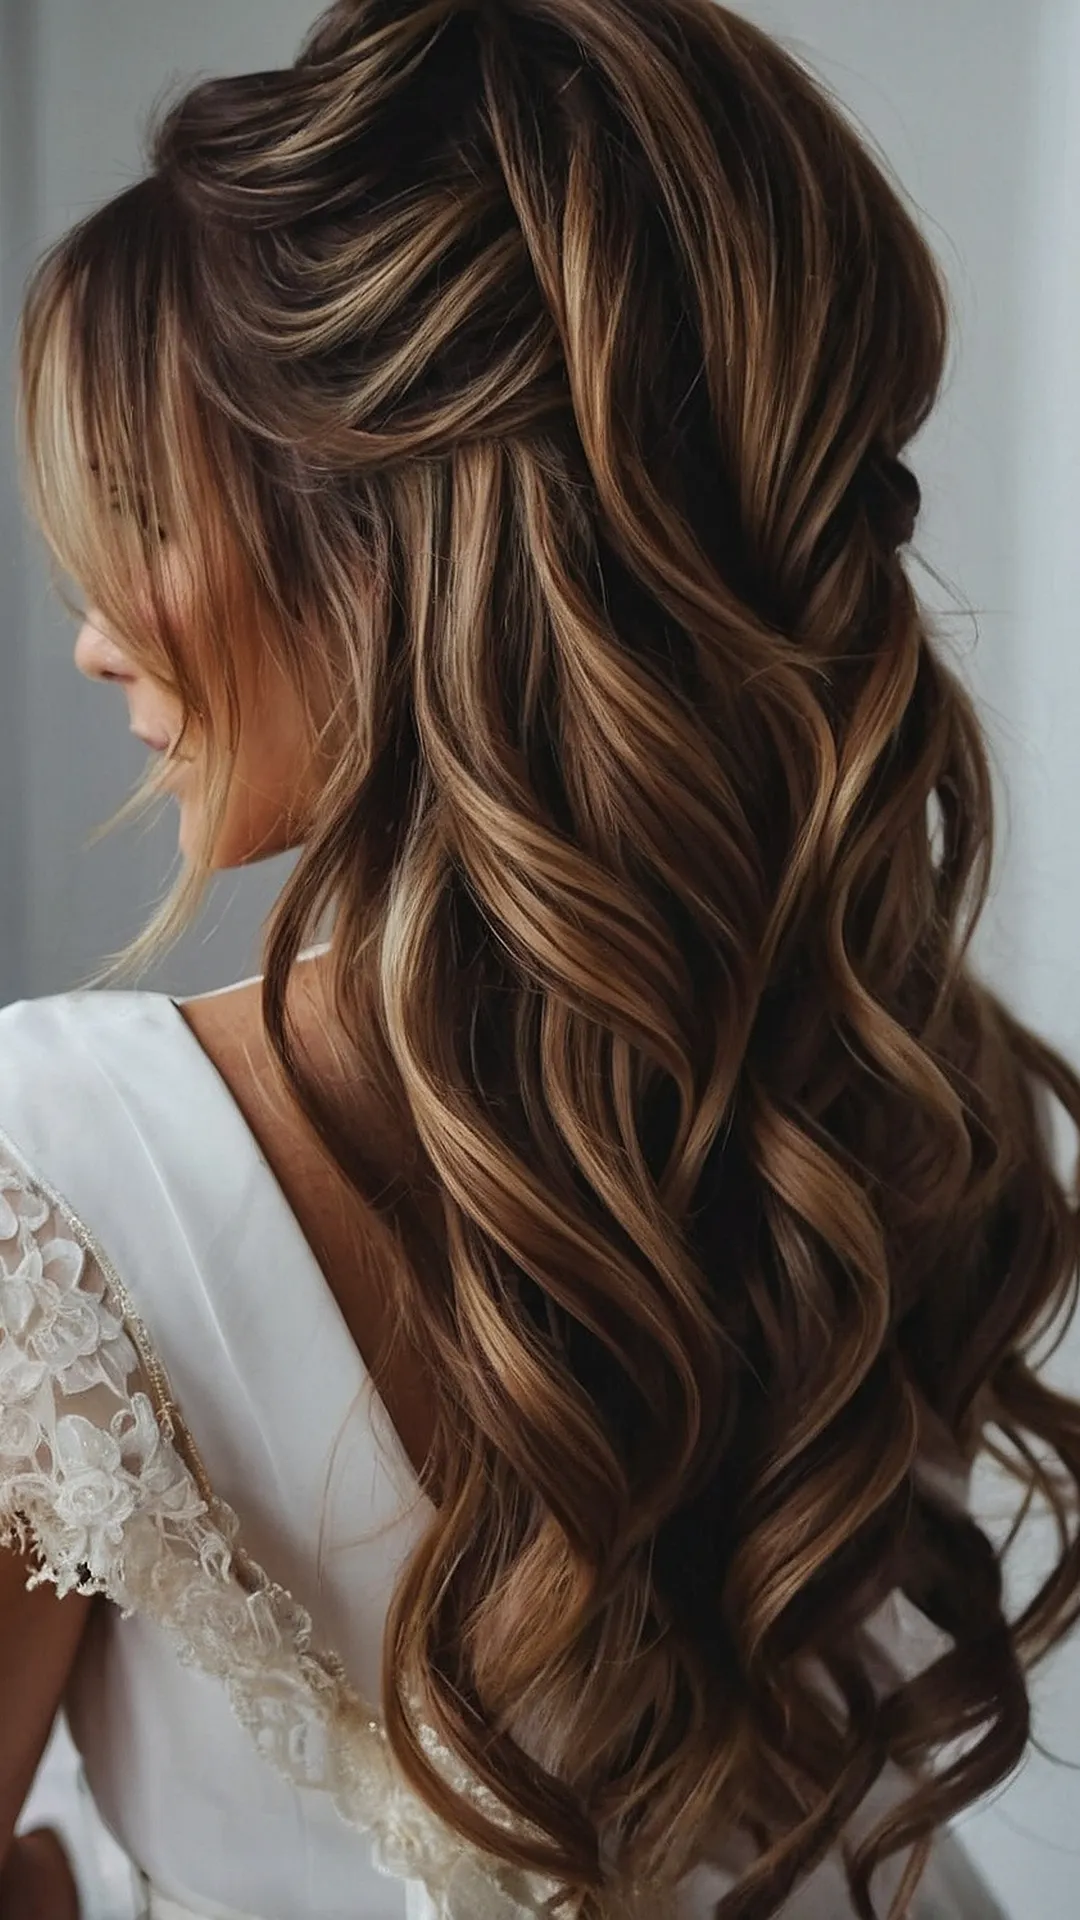 Exquisite Hairdos and Ornate Upstyles